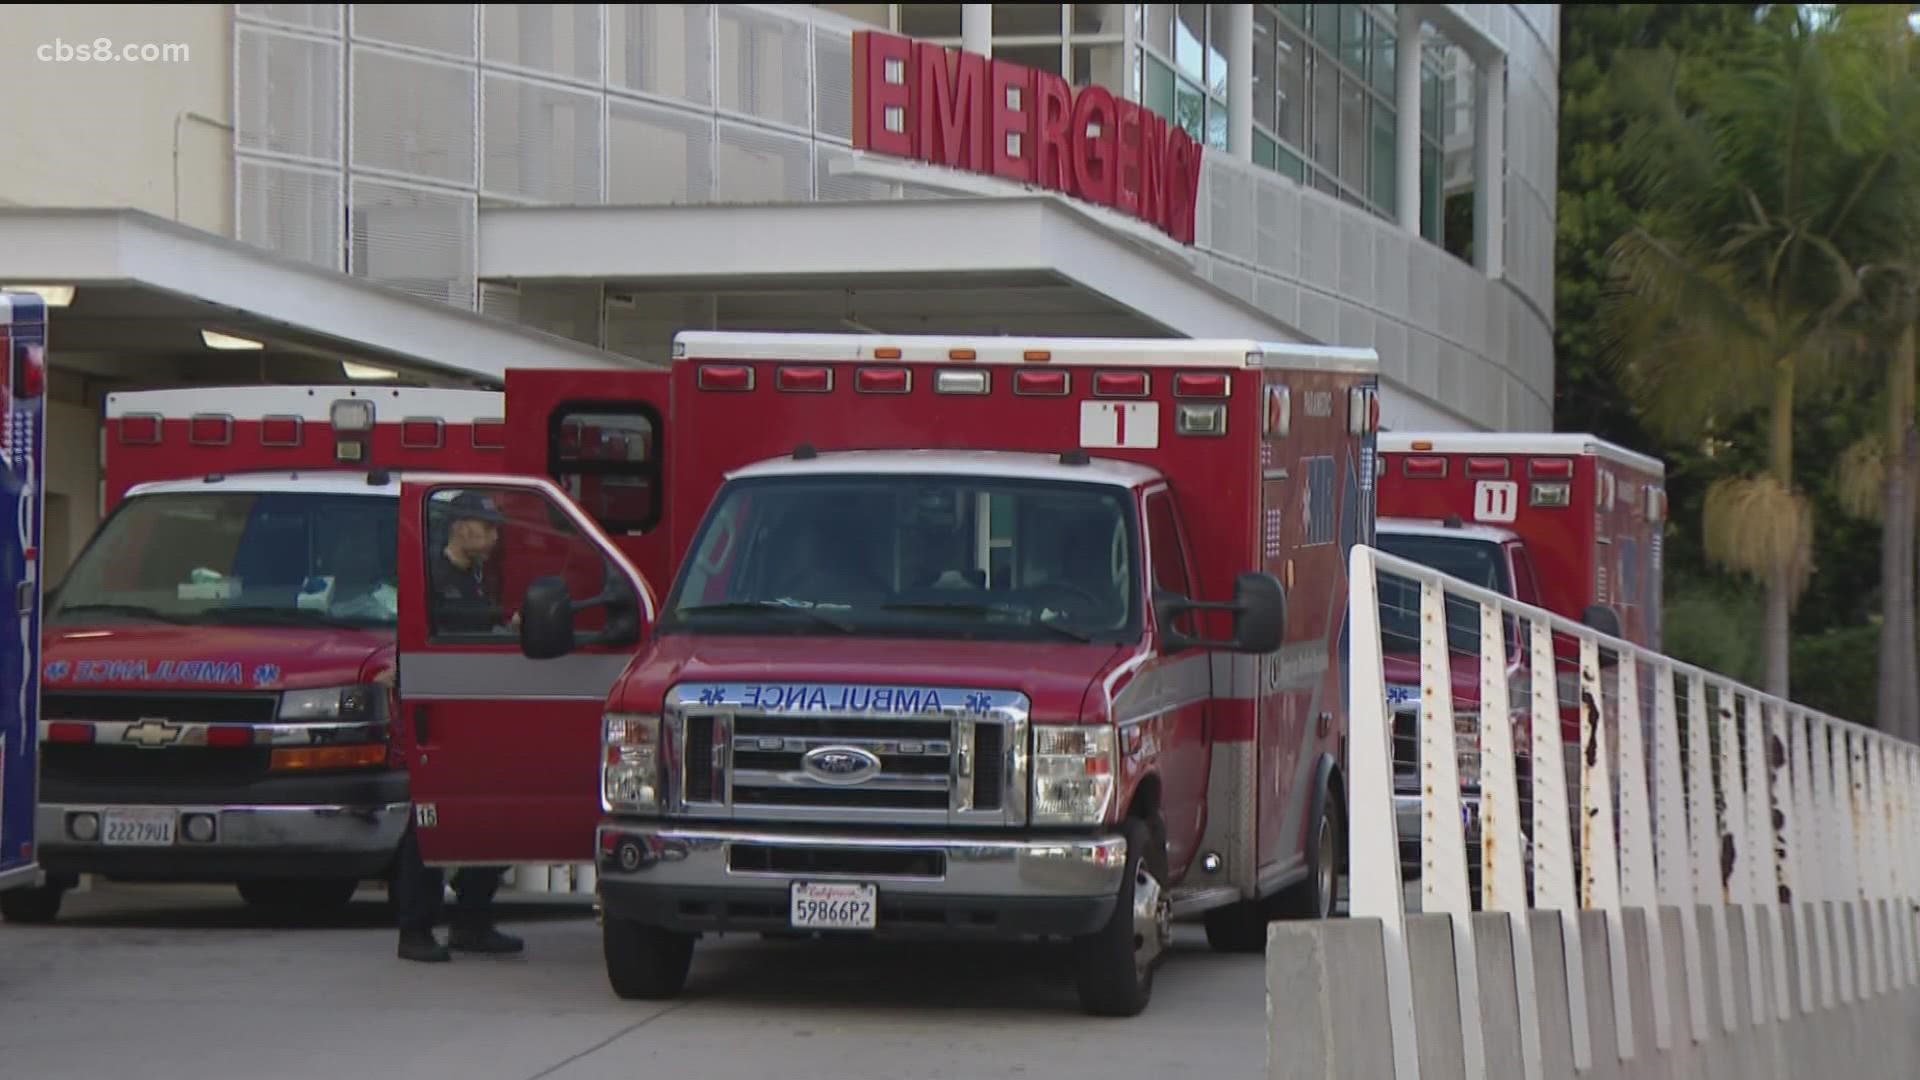 "It’s a pretty desperate situation right now in emergency rooms of many of the hospitals," said Jeff Behm, Managing Director of Falck San Diego.